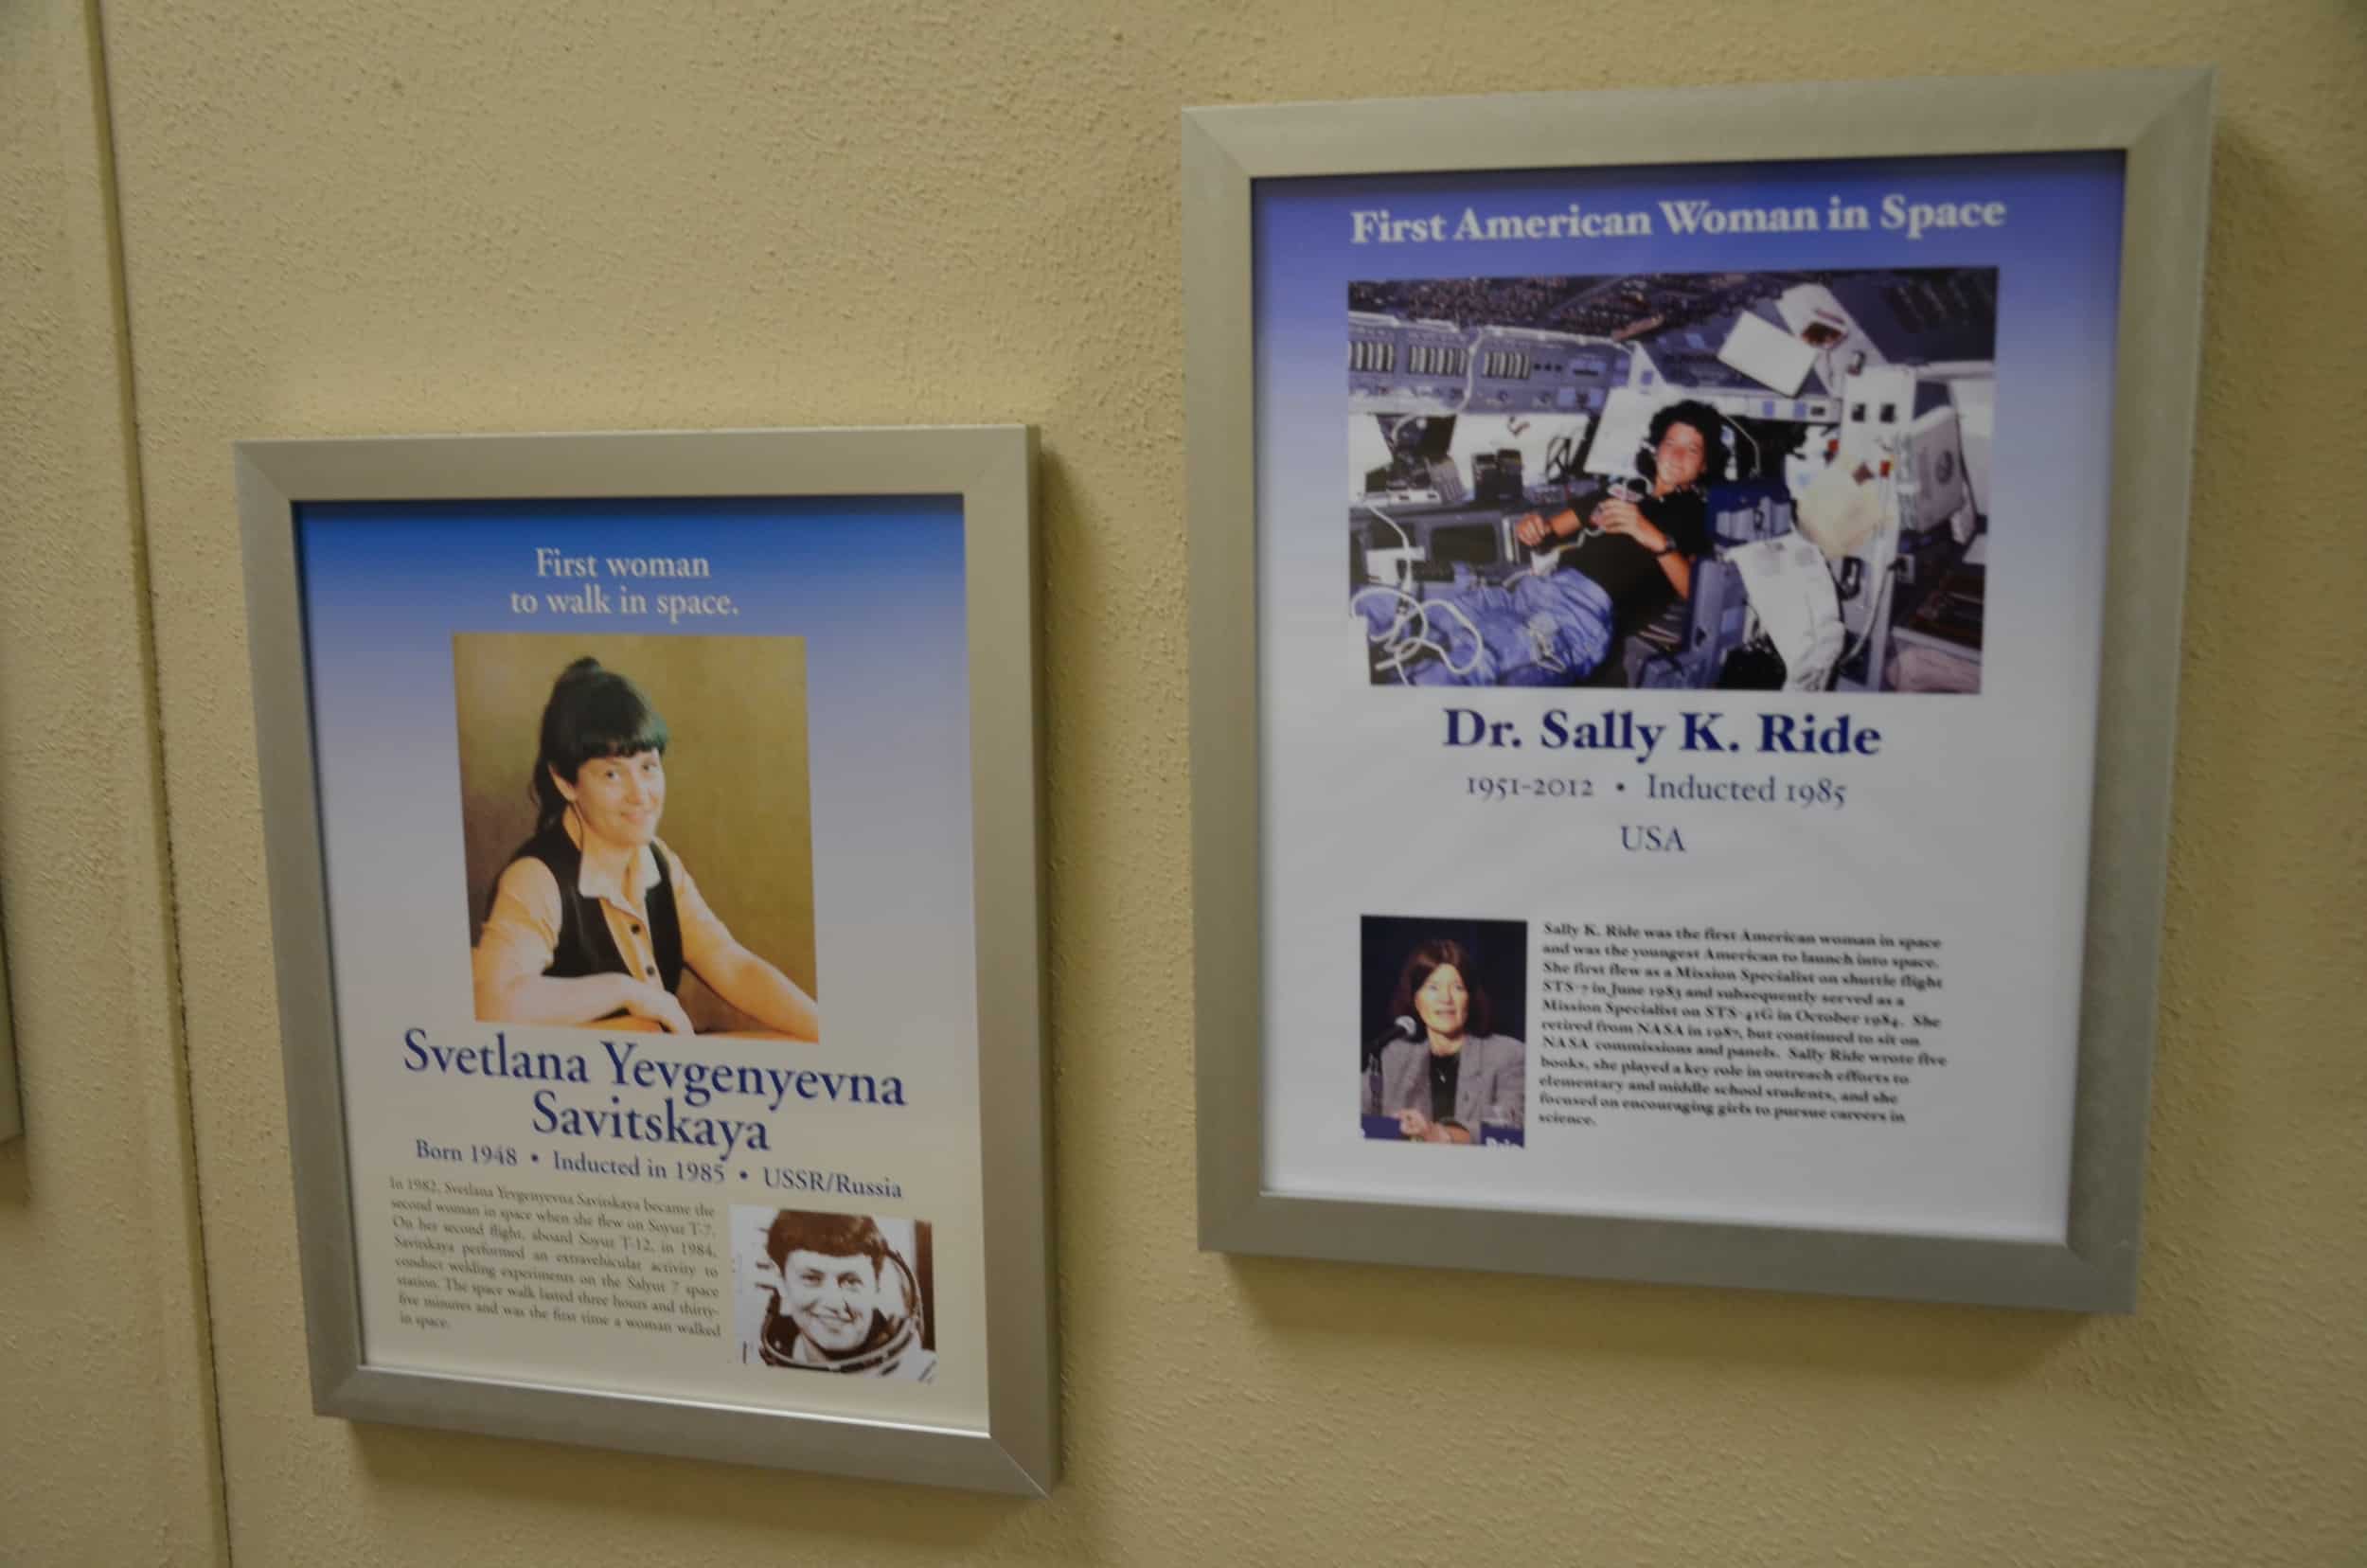 Svetlana Yevgenyevna Savitskaya (first woman to walk in space) and Sally Ride (1951-2012) (first American woman in space) in the International Space Hall of Fame at the New Mexico Museum of Space History in Alamogordo, New Mexico